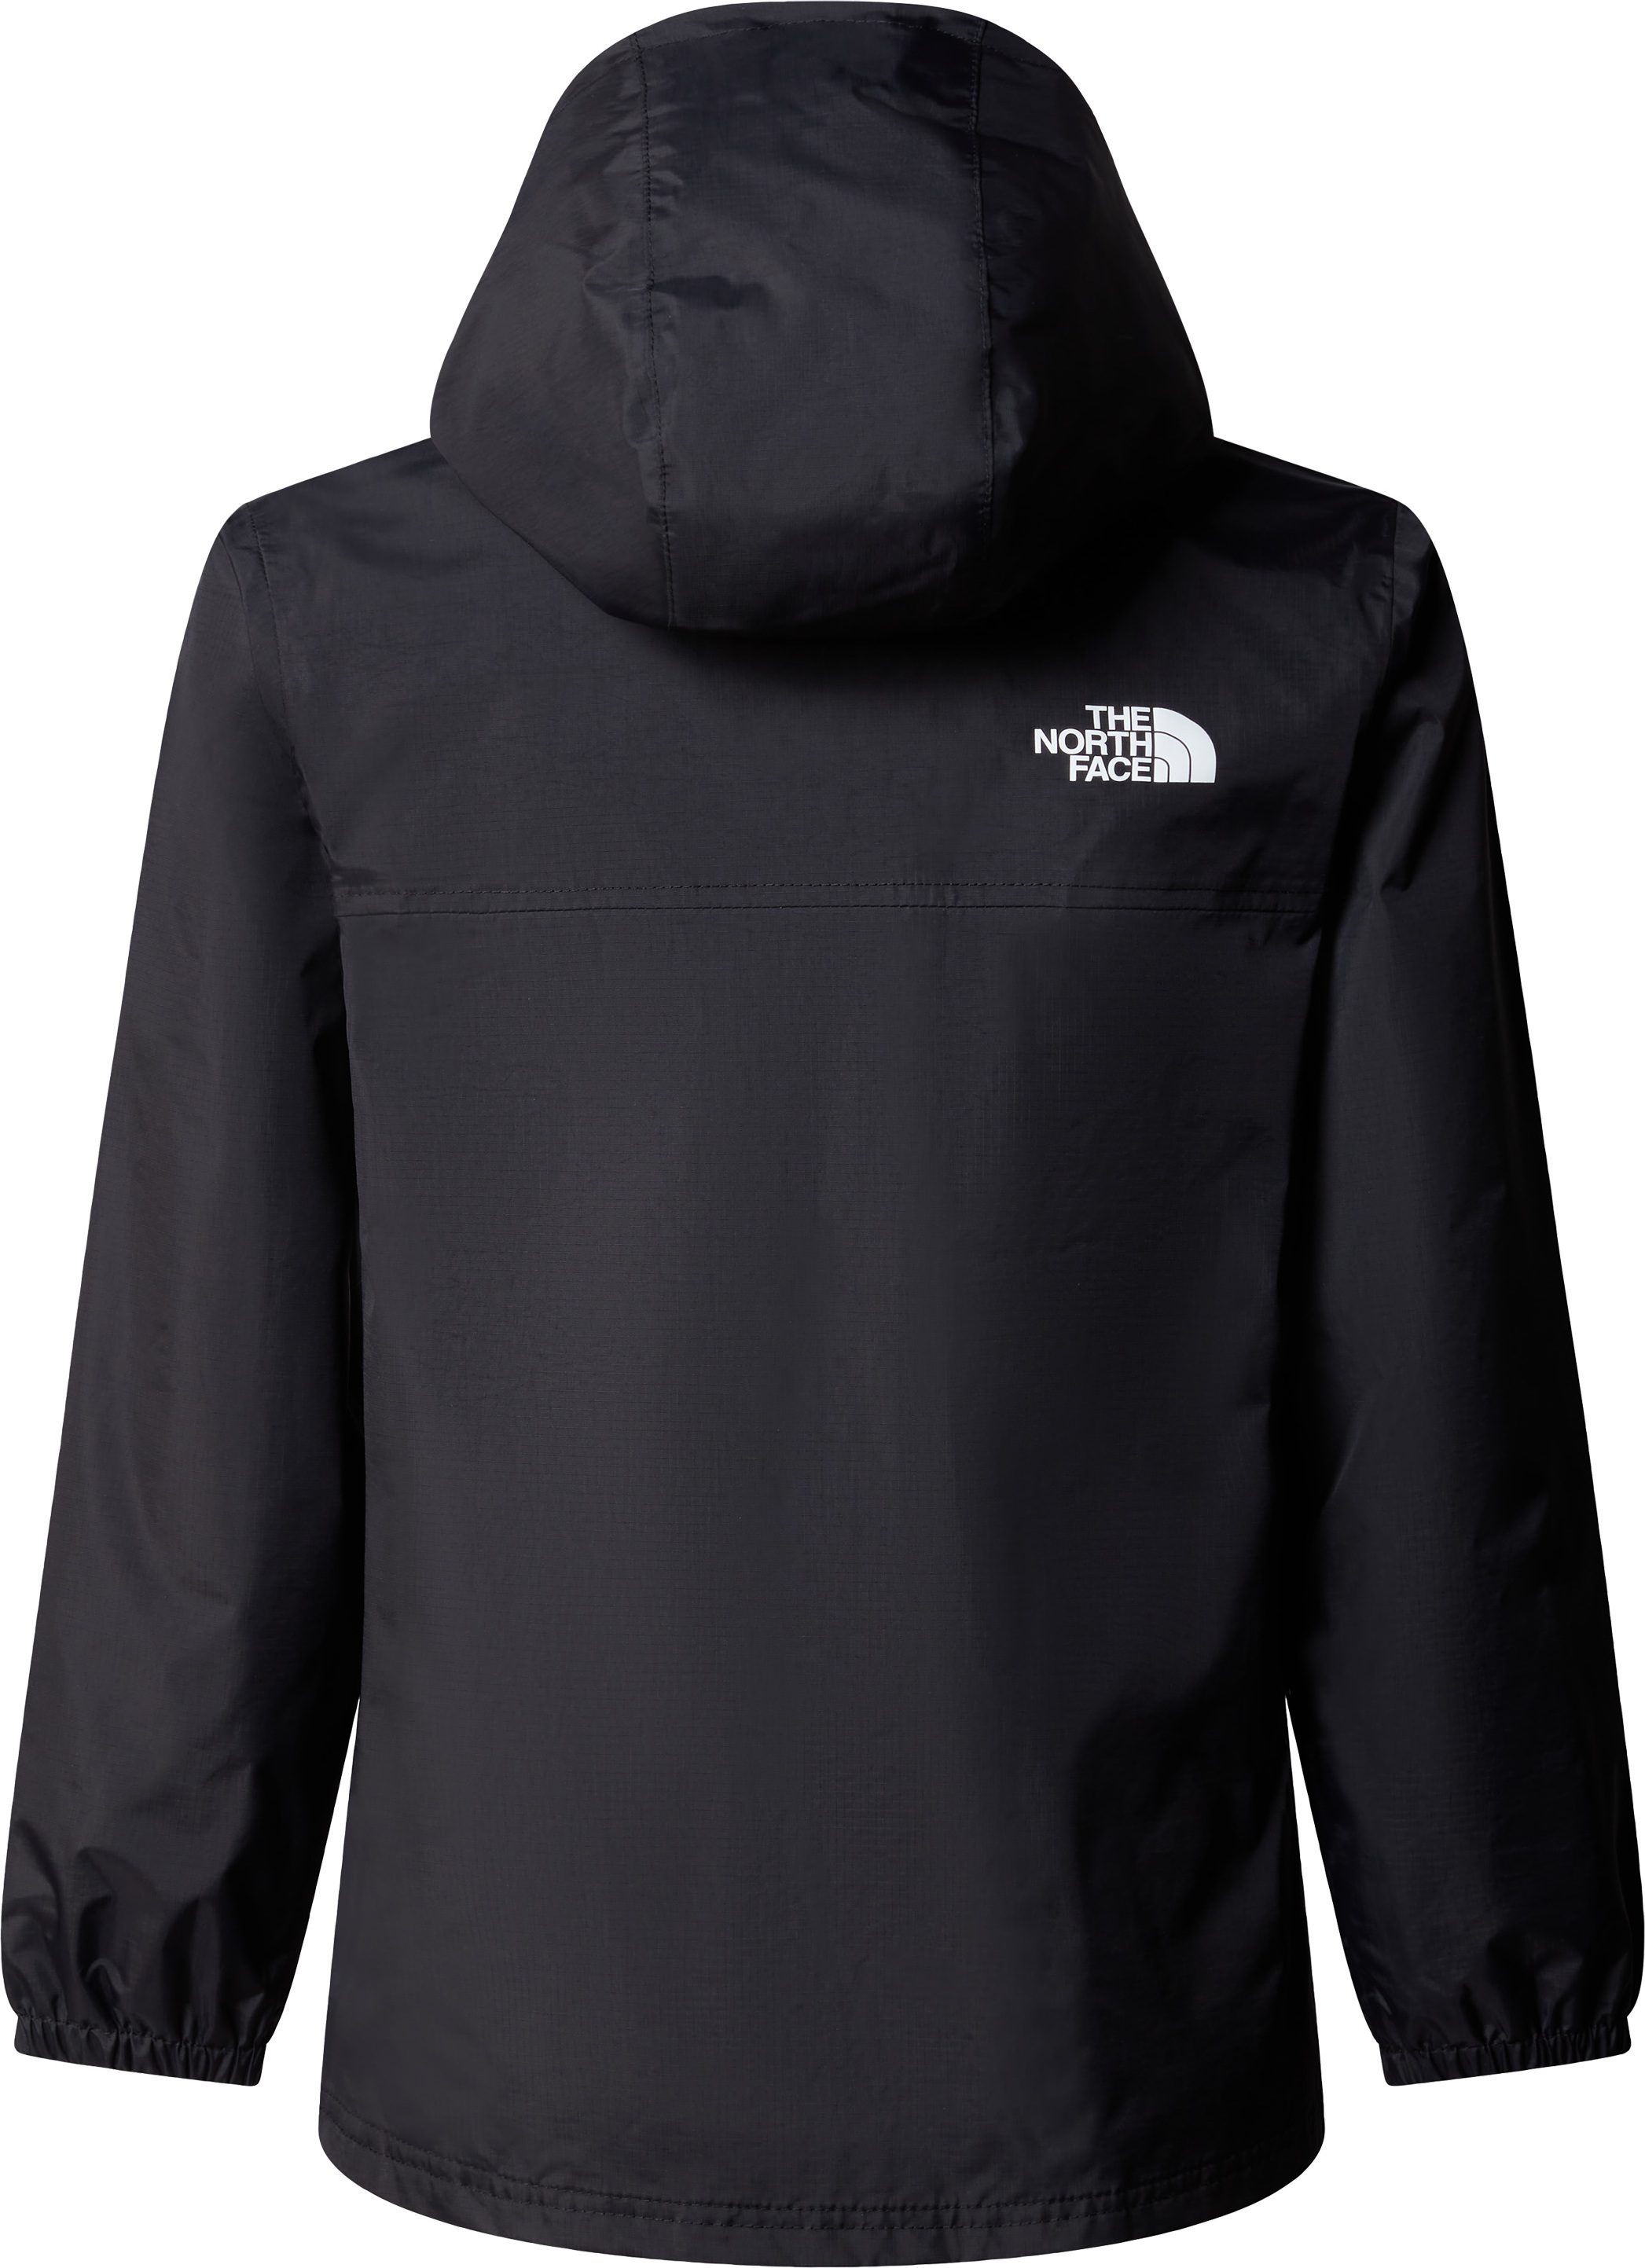 The North Face girls youth XL Black Hyvent Down Fill Waterproof